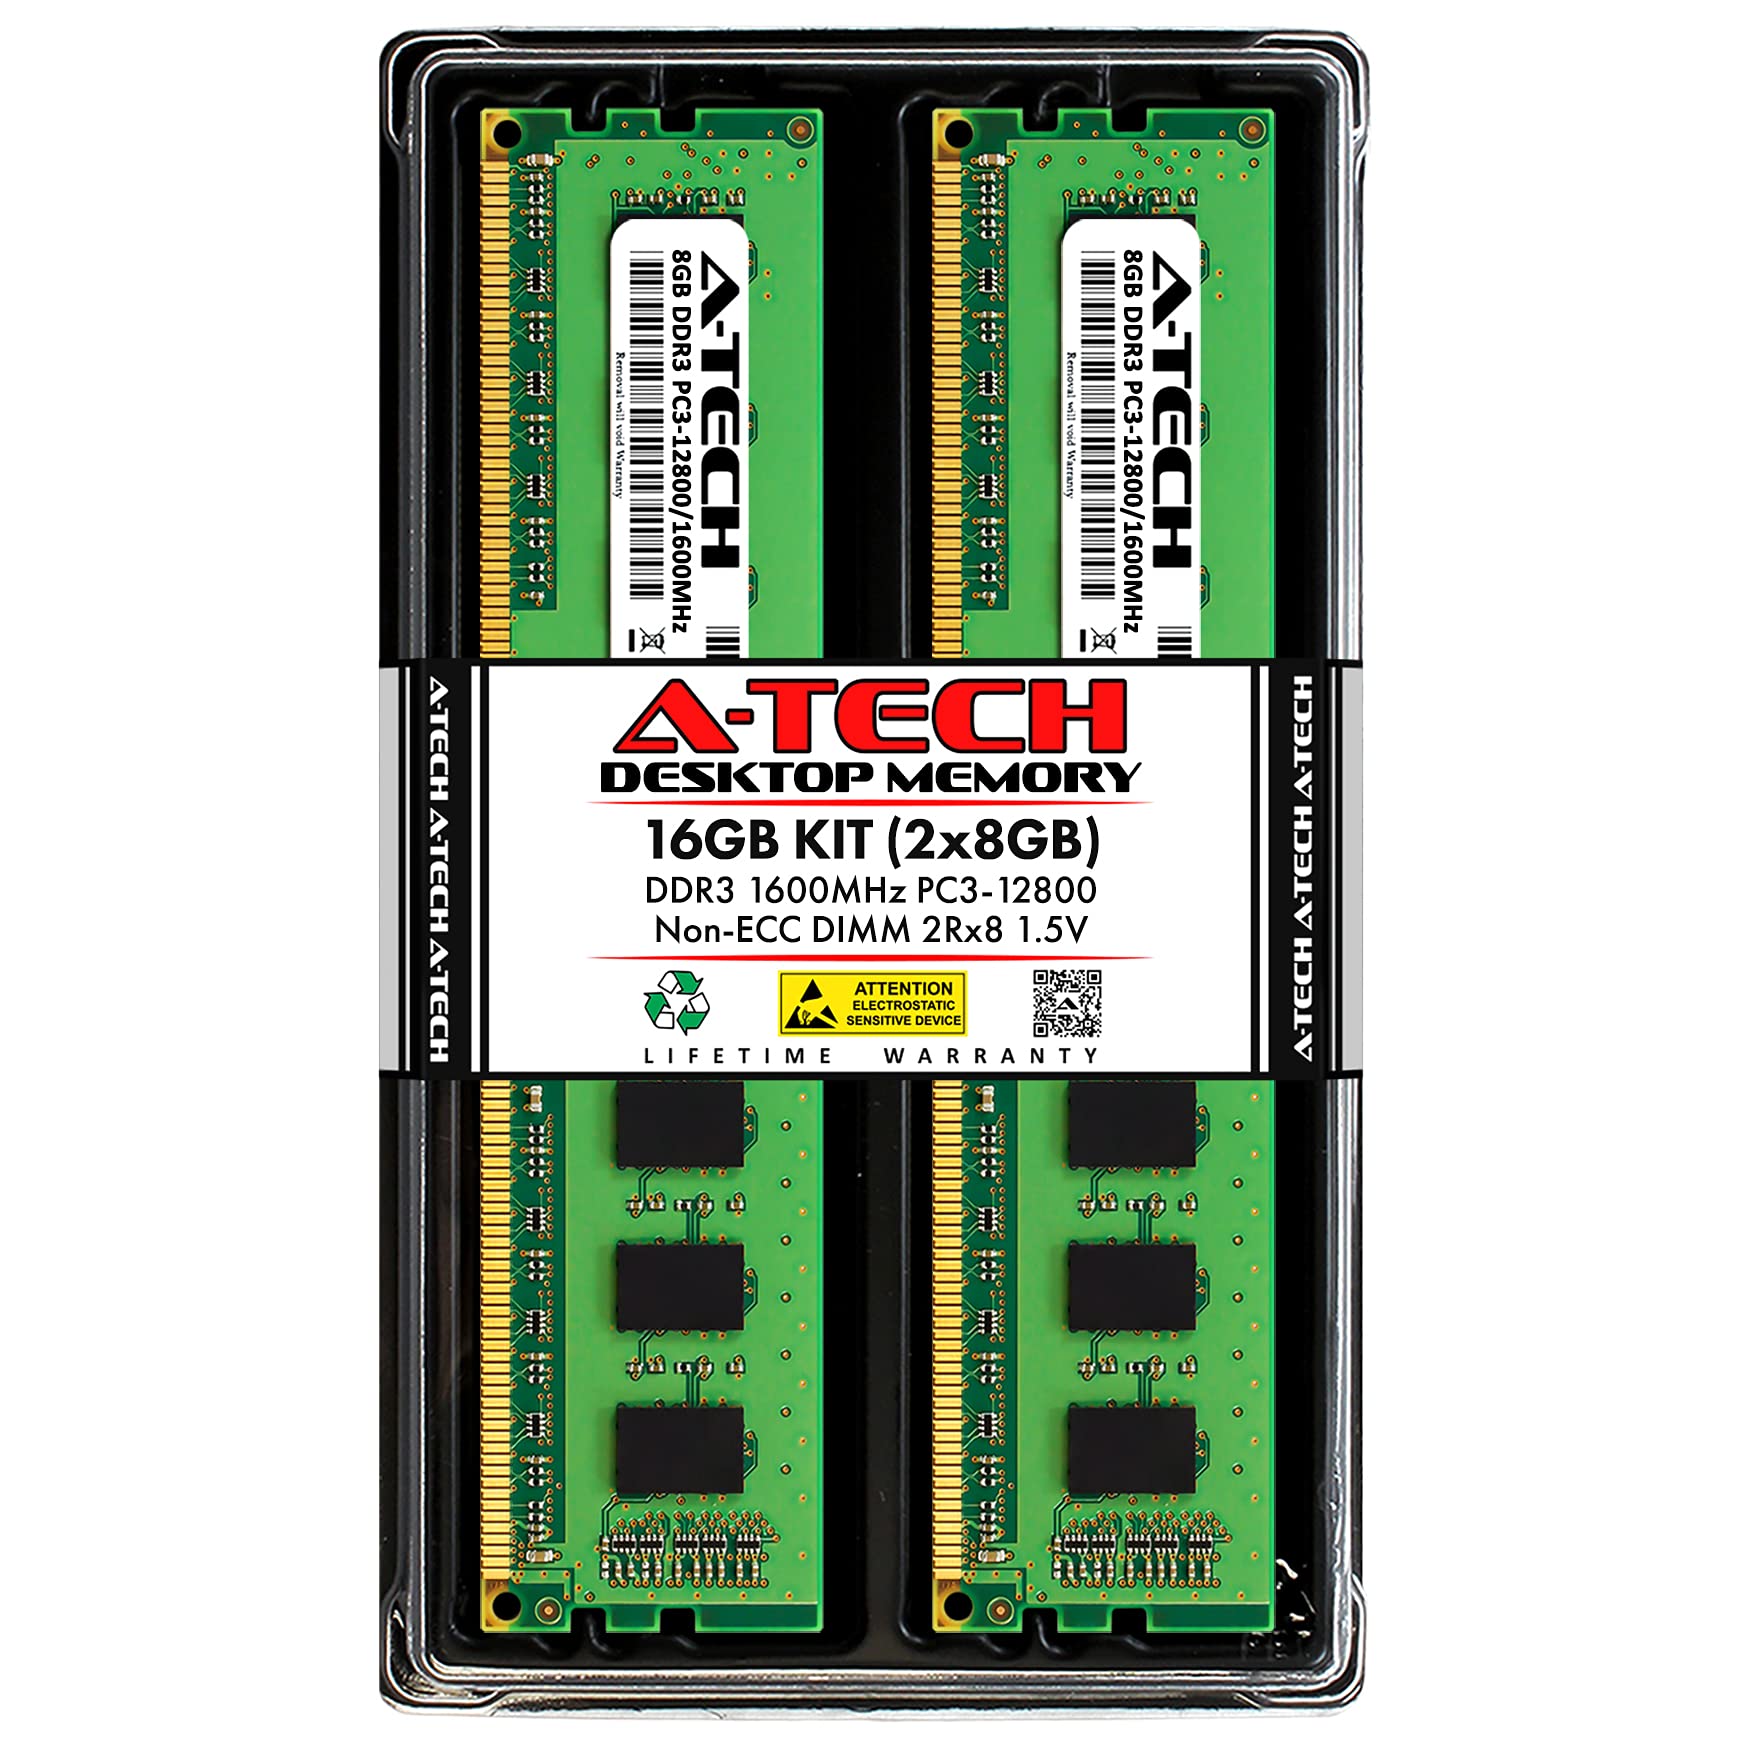 A-Tech 8GB DDR3 1600 PC3-12800 2Rx8 1.5V 非ECC DIMM デスクトップRAMキット Parent 8 GB AT8G2D3D1600ND8N15V